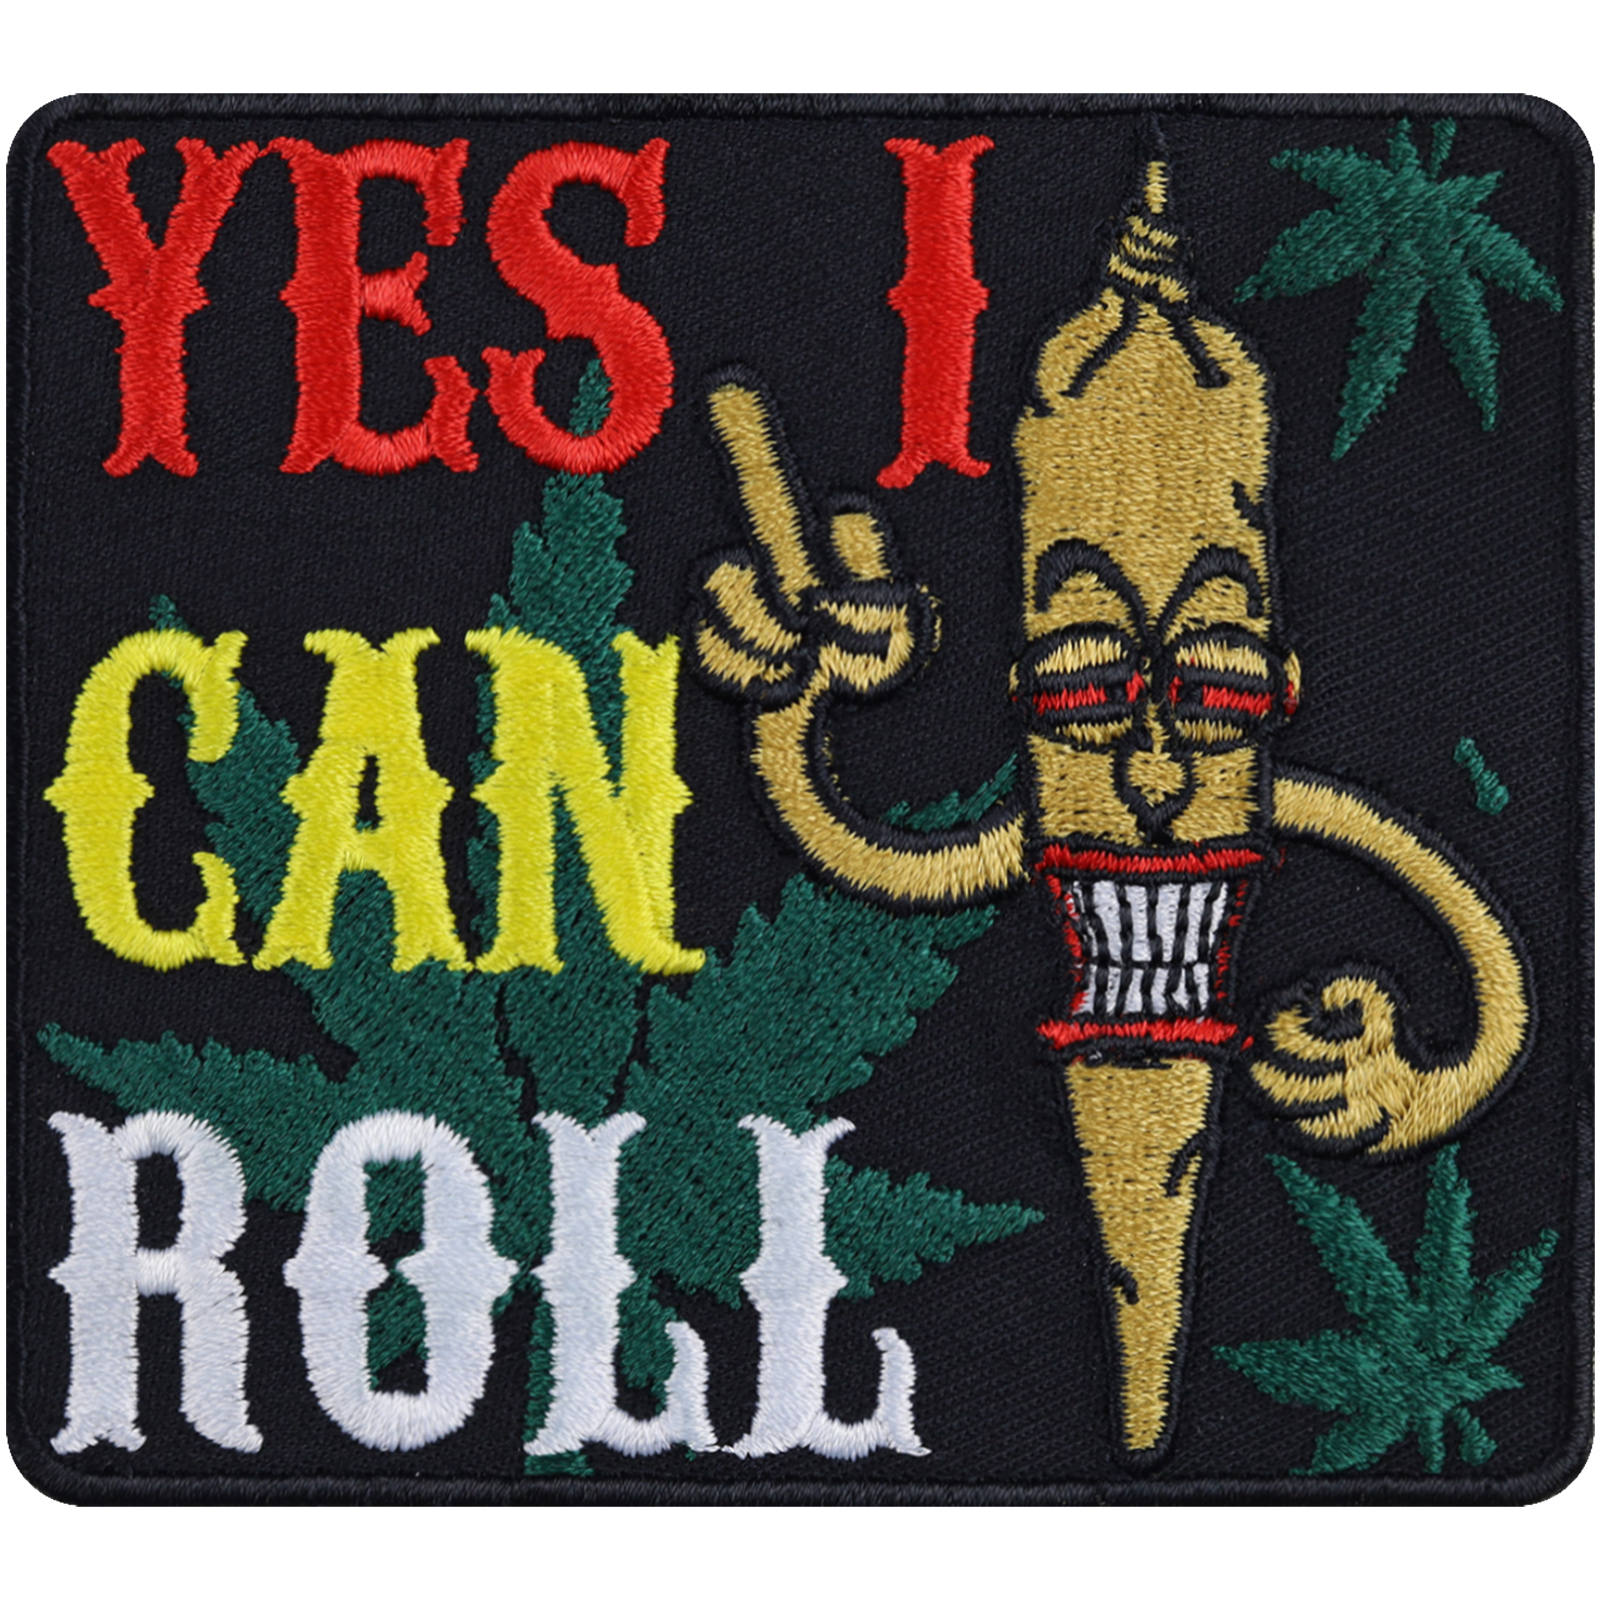 Yes i can roll - Patch